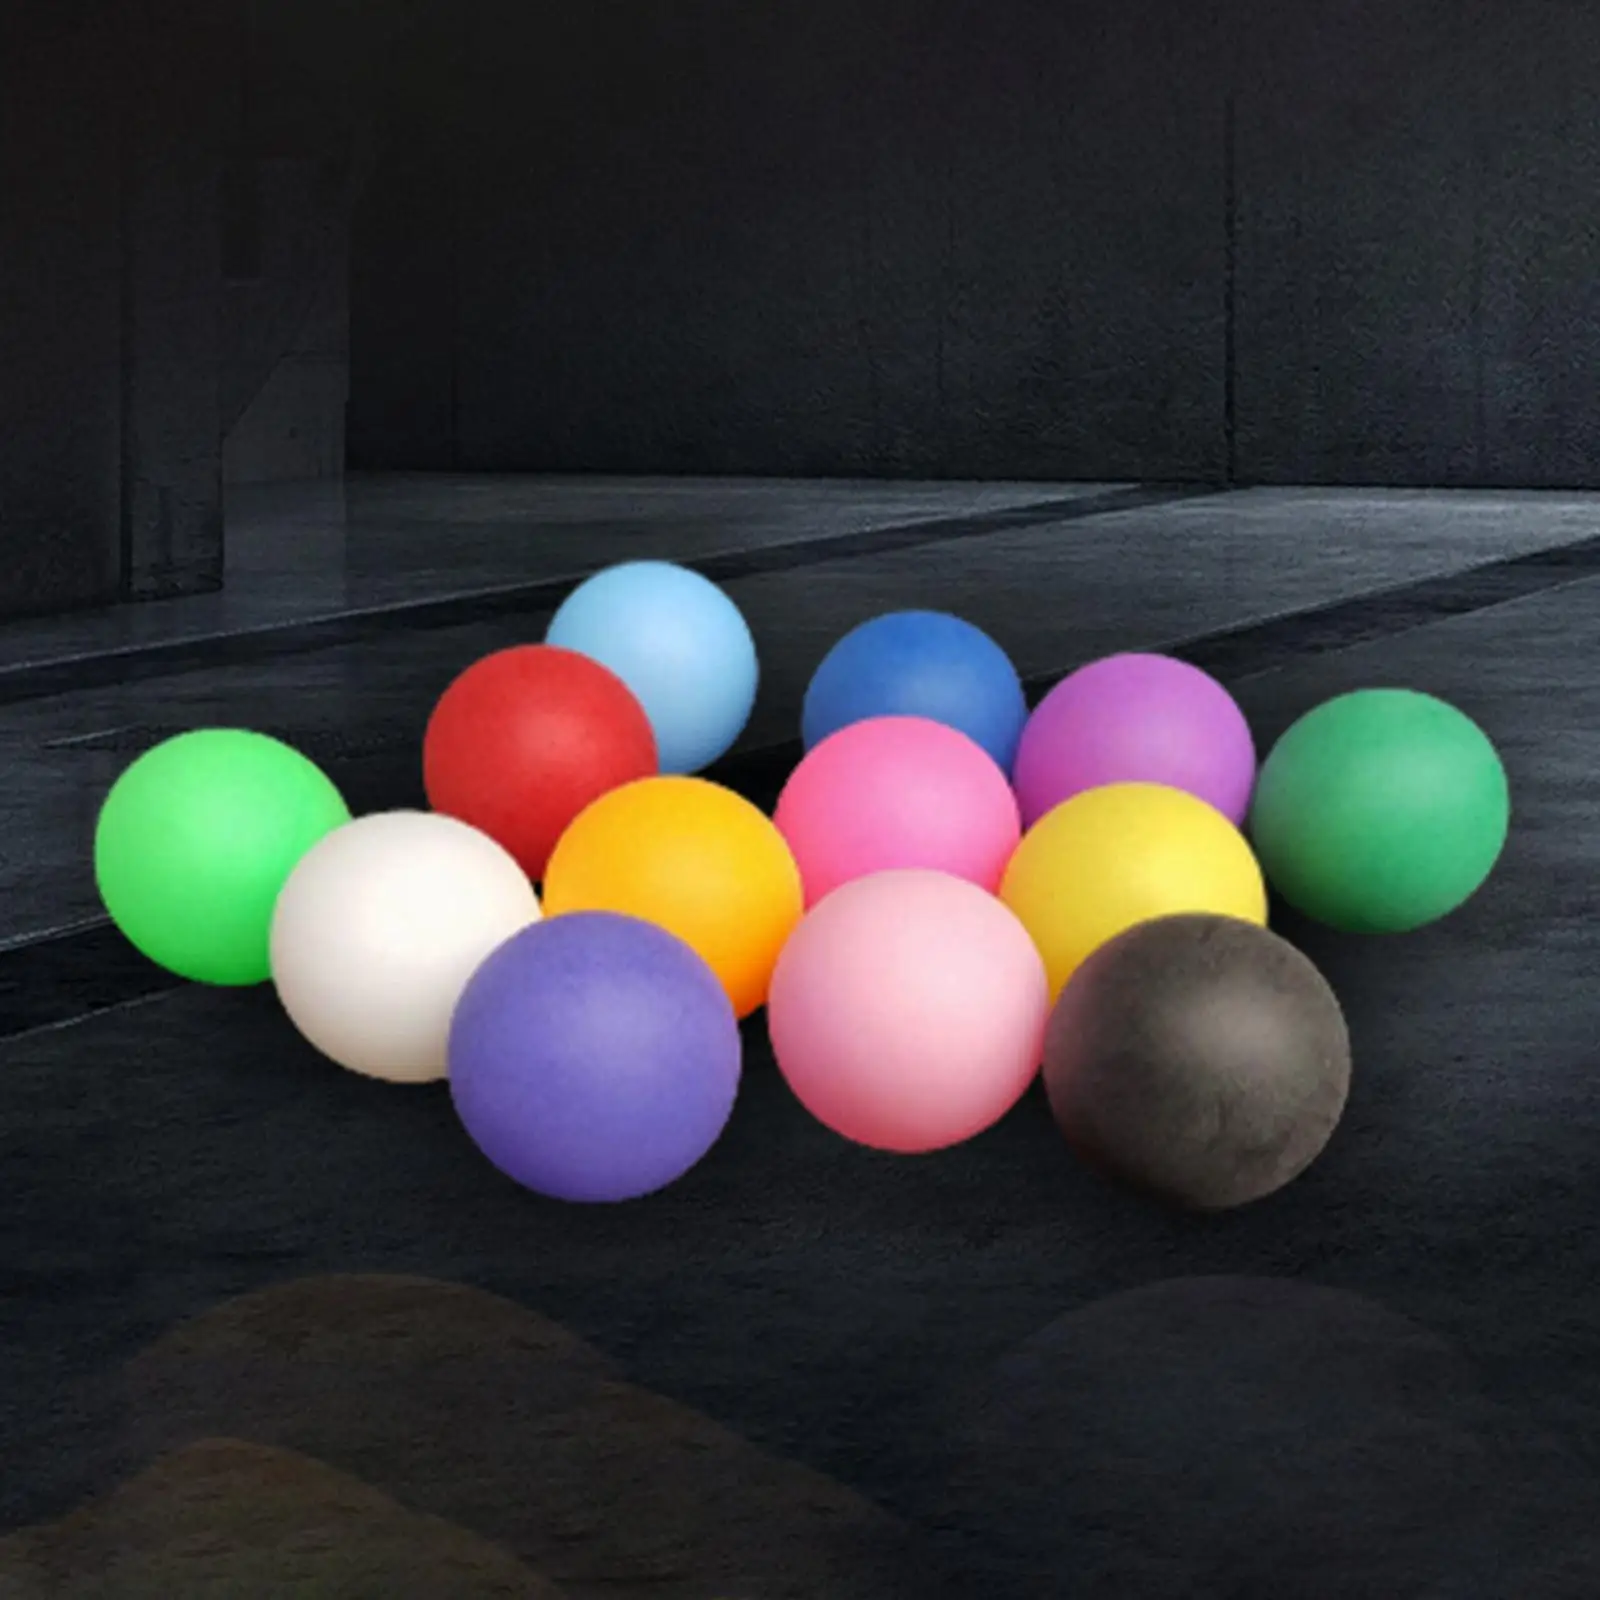 50 Pieces Colored Ping Pong Balls DIY 40mm Table Tennis Balls for Pong Games